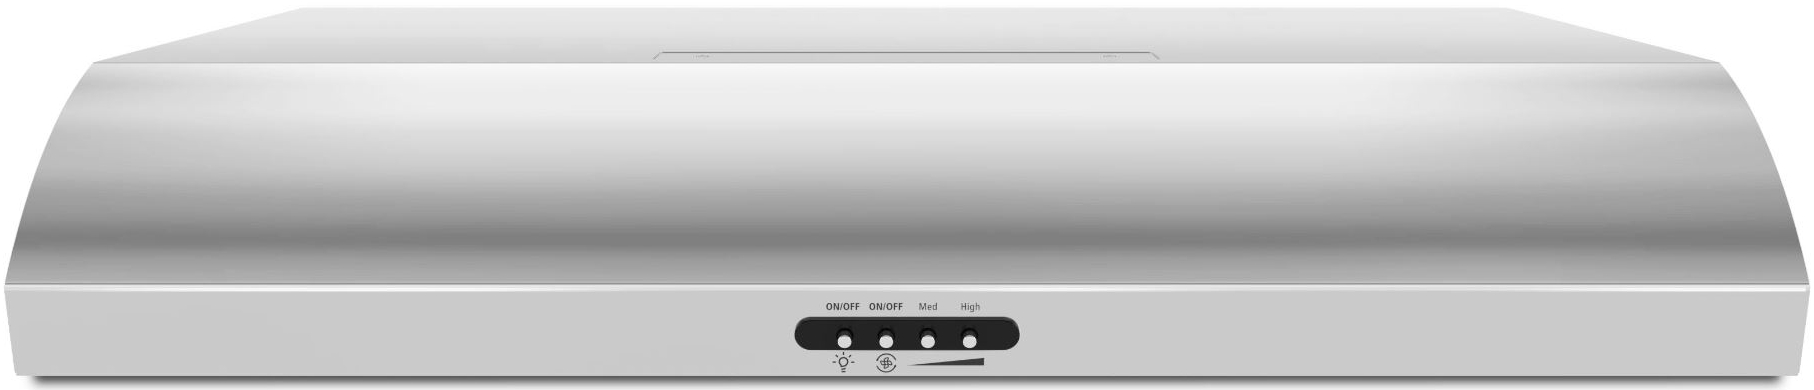 Maytag® 36" Stainless Steel Under the Cabinet Range Hood with the FIT System-UXT5236BDS